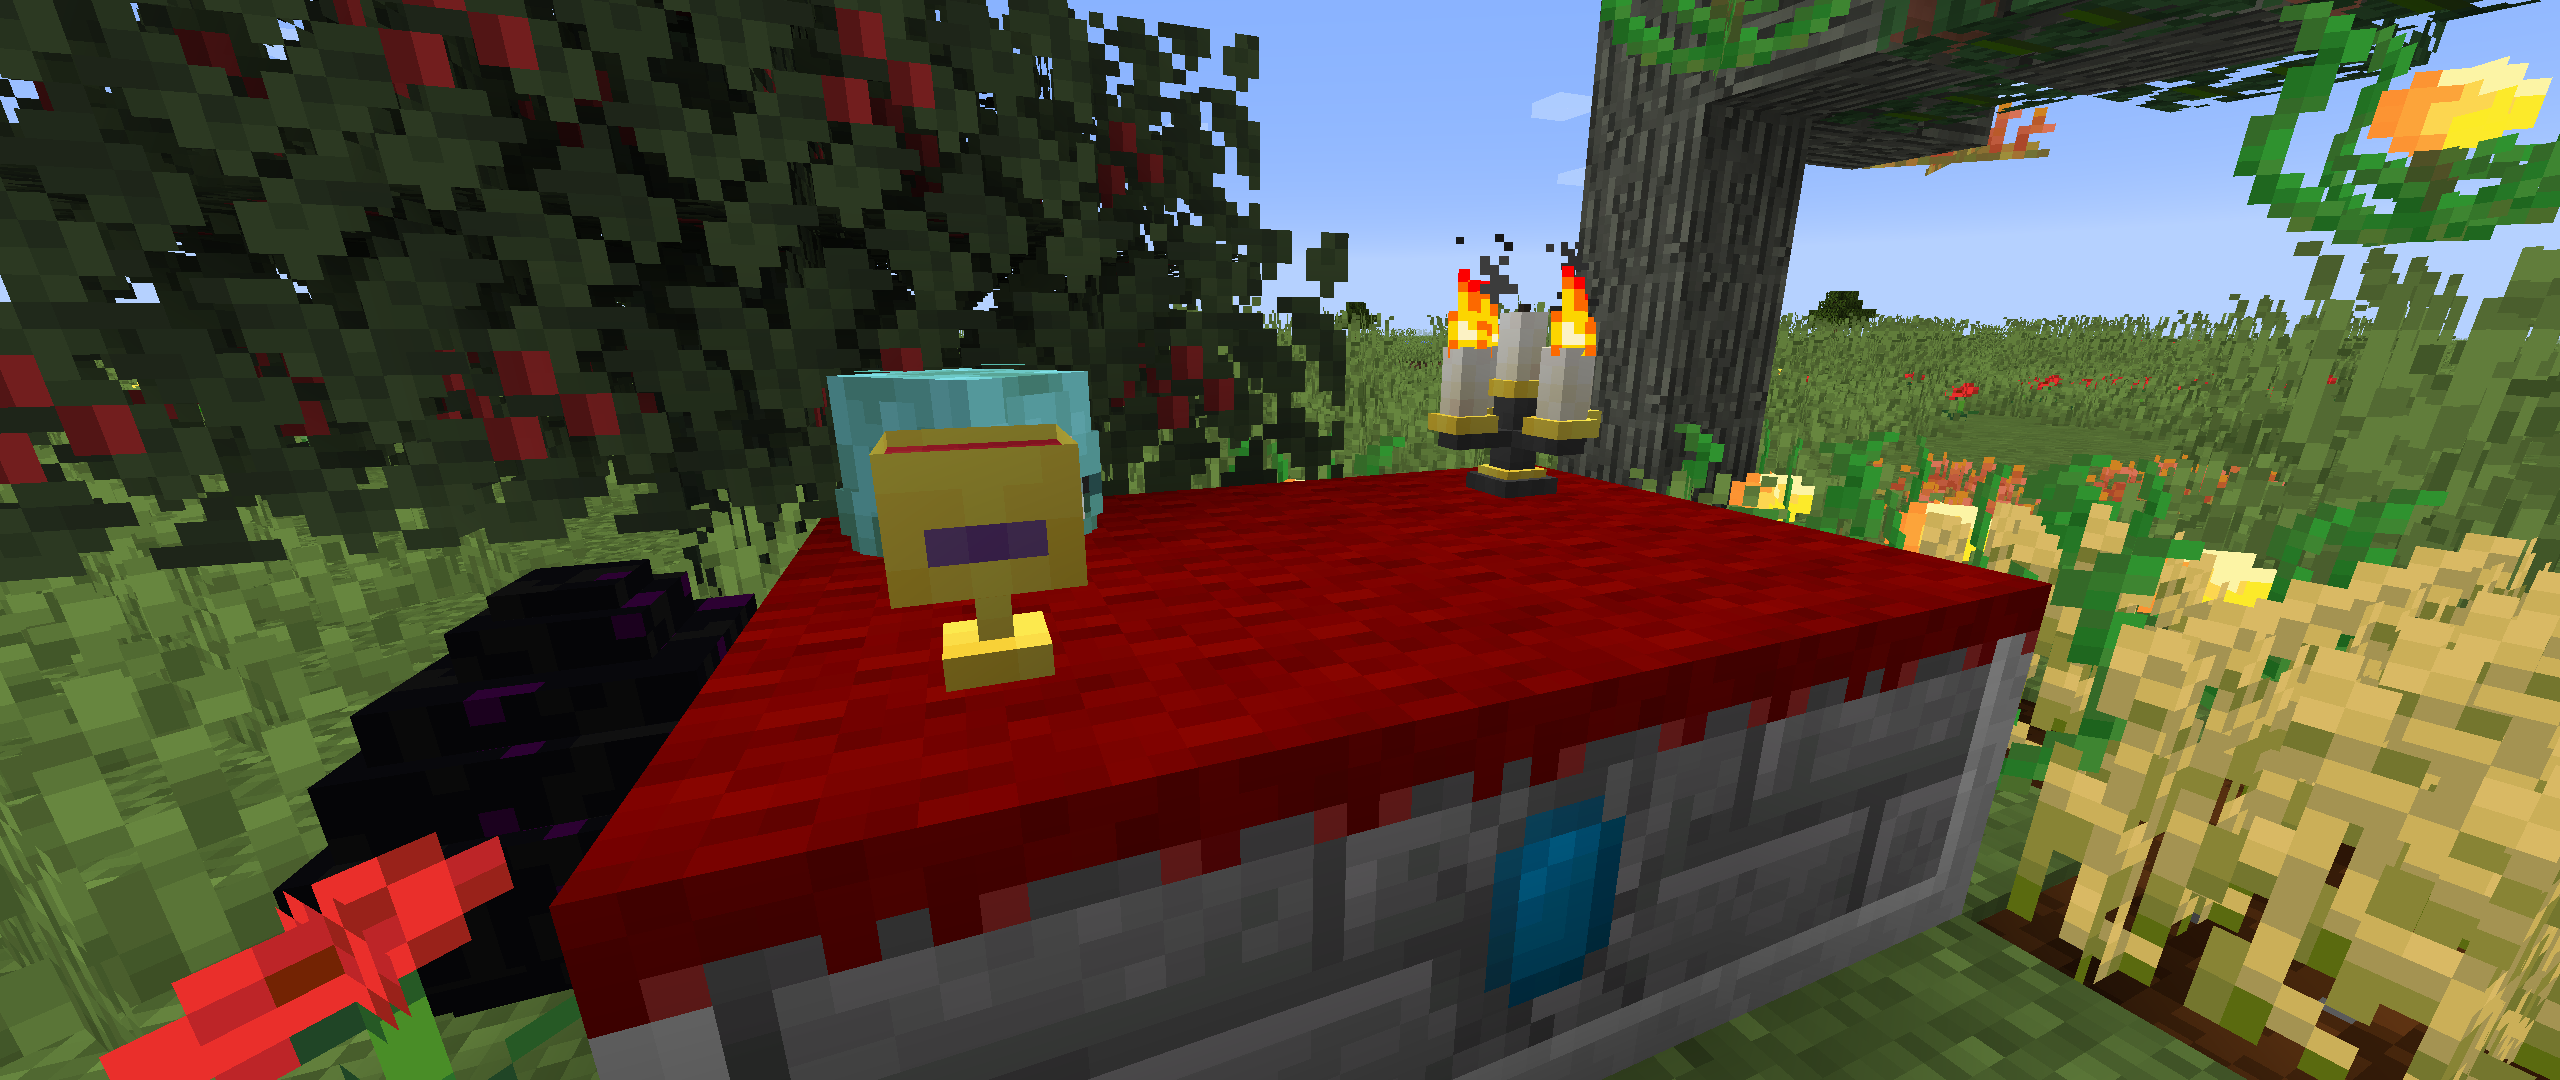 Enchanted: Witchcraft screenshot 3